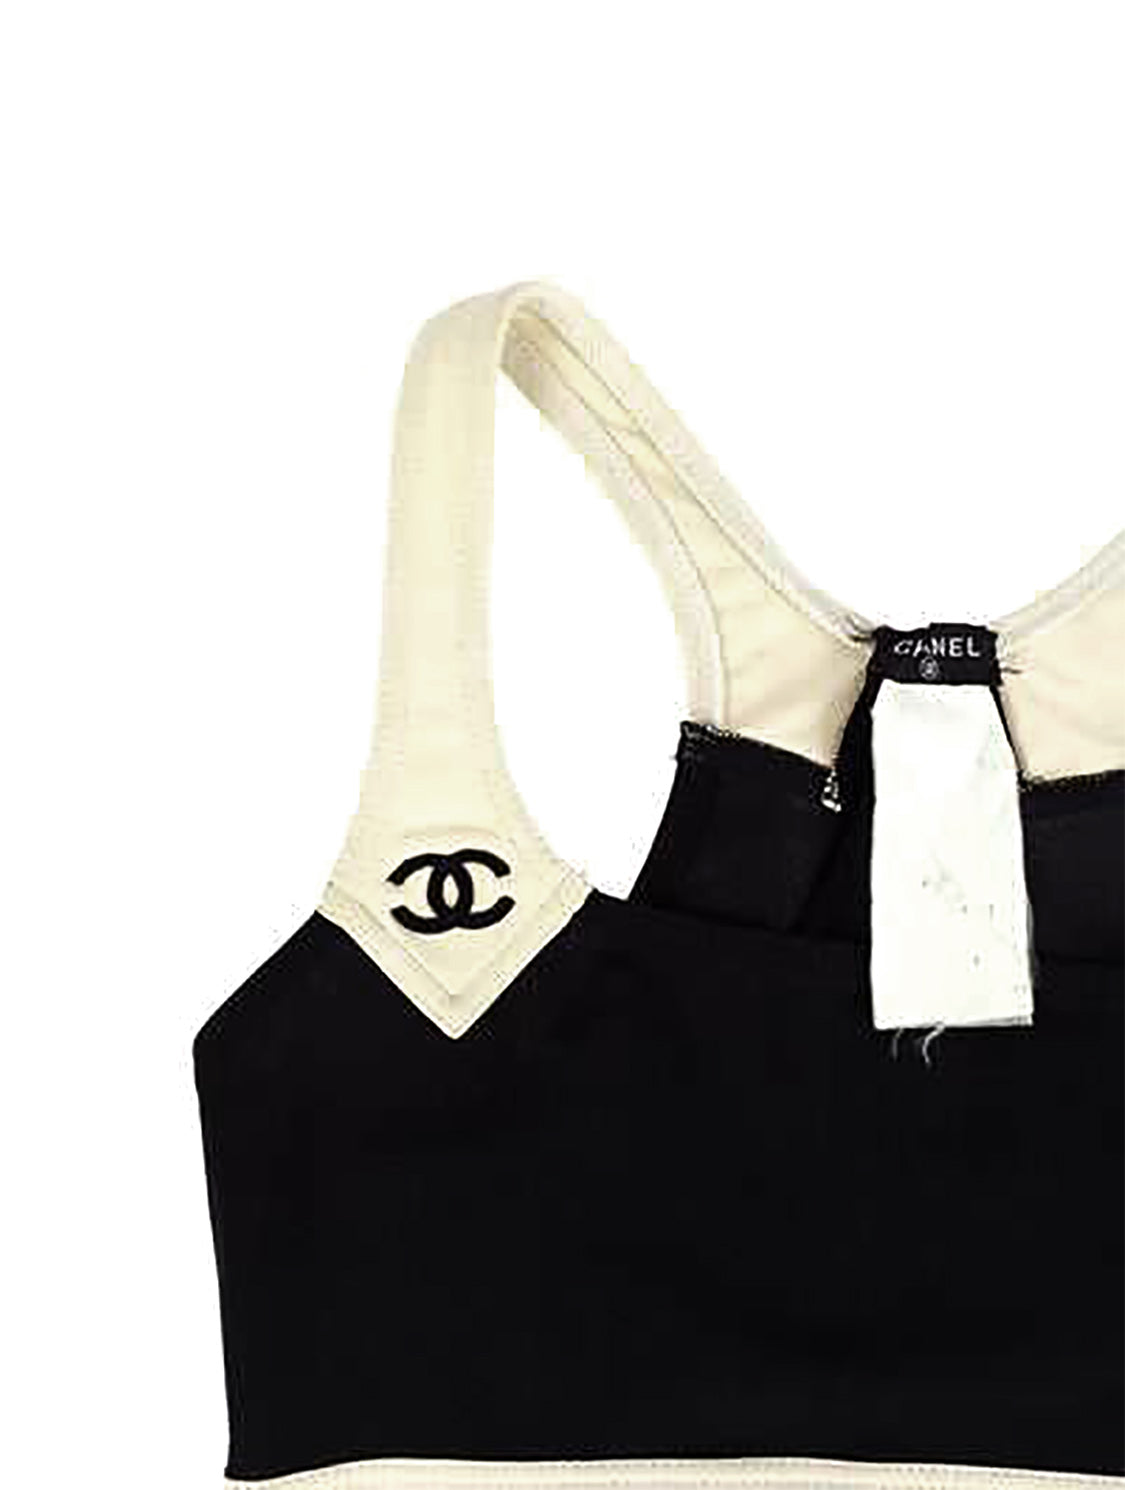 CHANEL 19P Knit Dress with Lace Details 38 FR Black White  Timeless  Luxuries